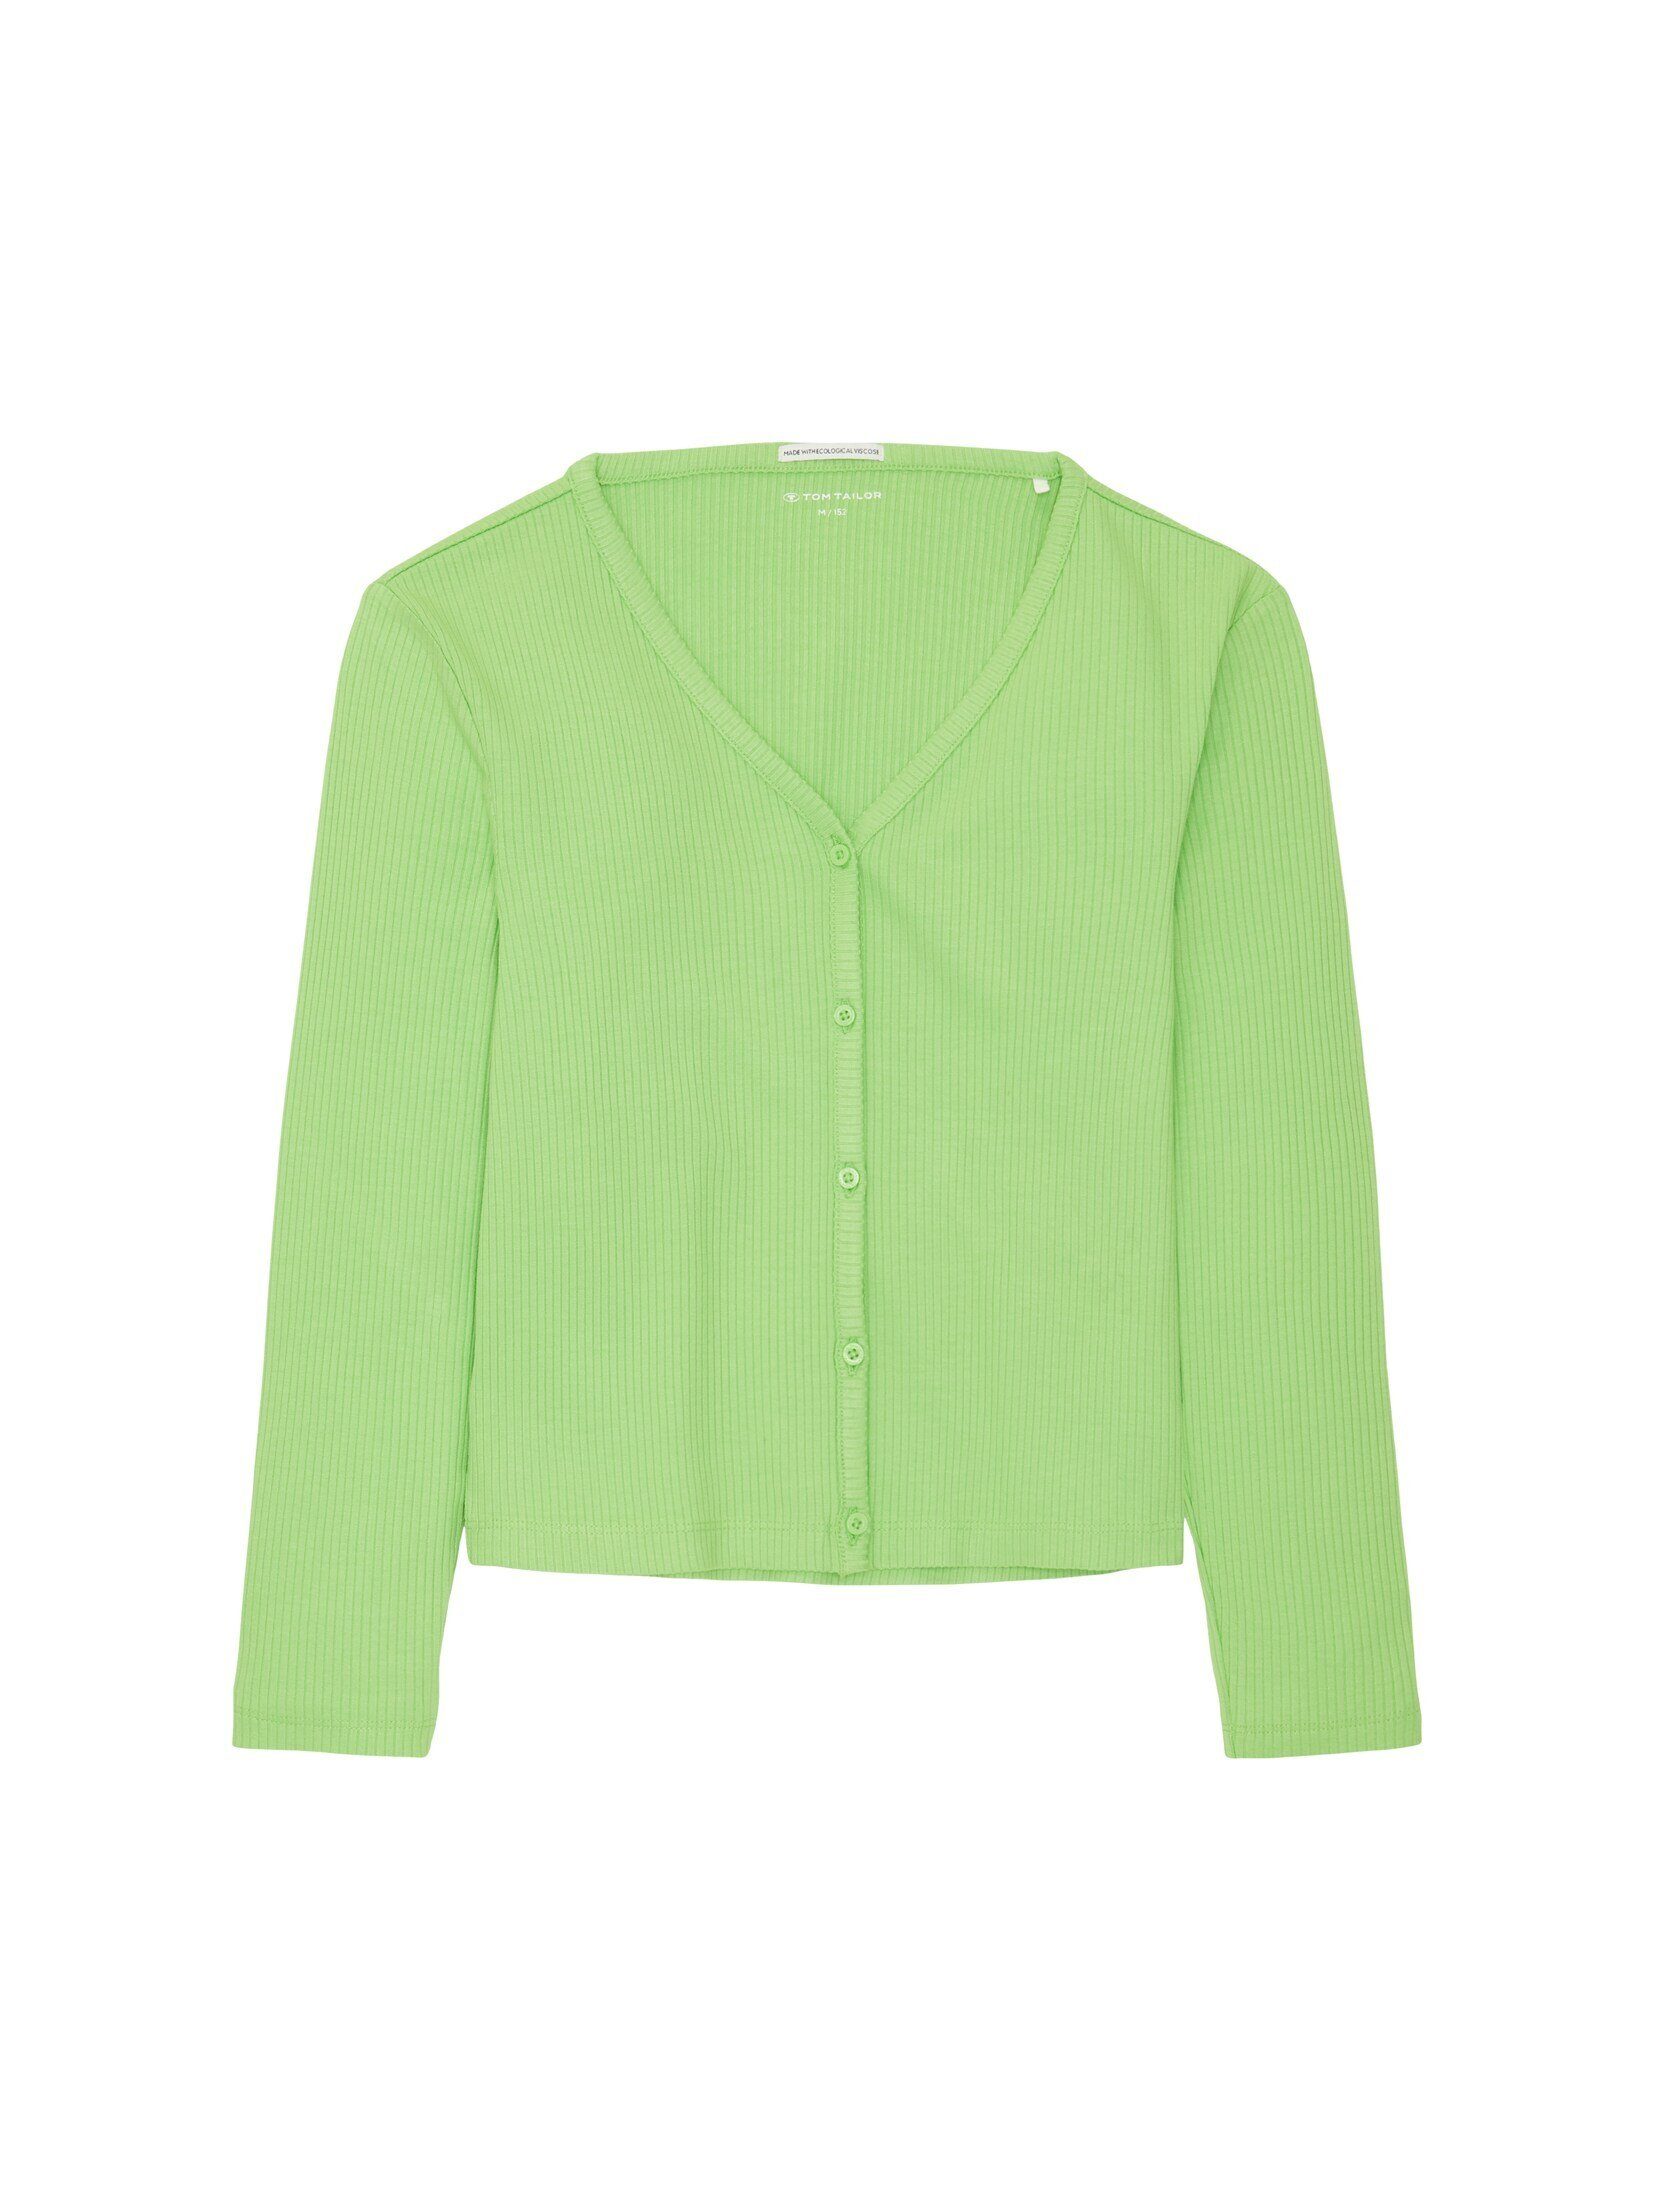 TOM TAILOR T-Shirt Cropped Rippjacke liquid lime green